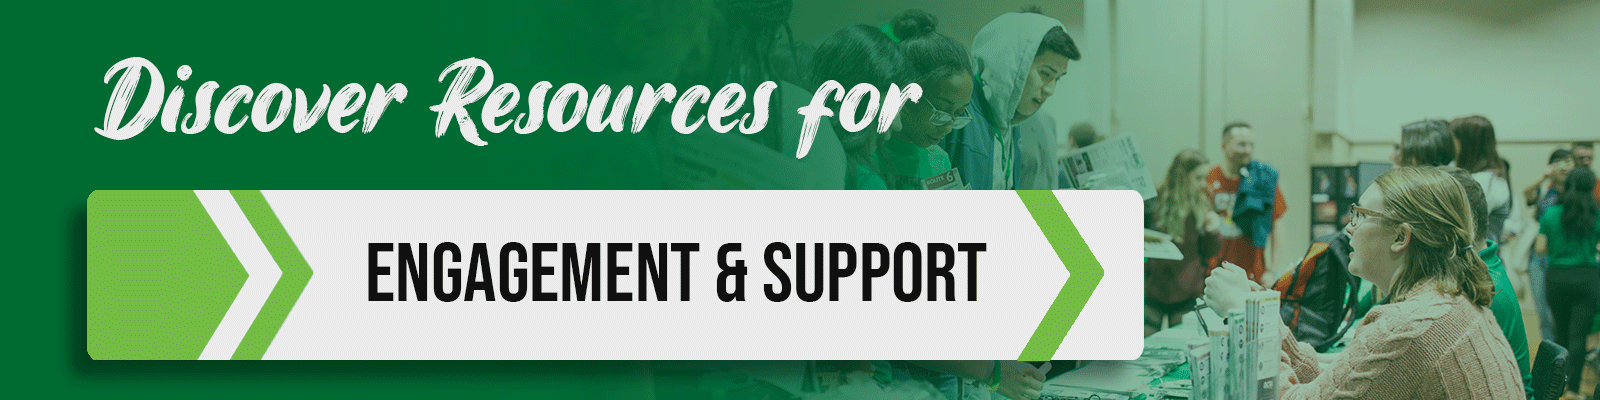 Discover Resources for Engagement and Support